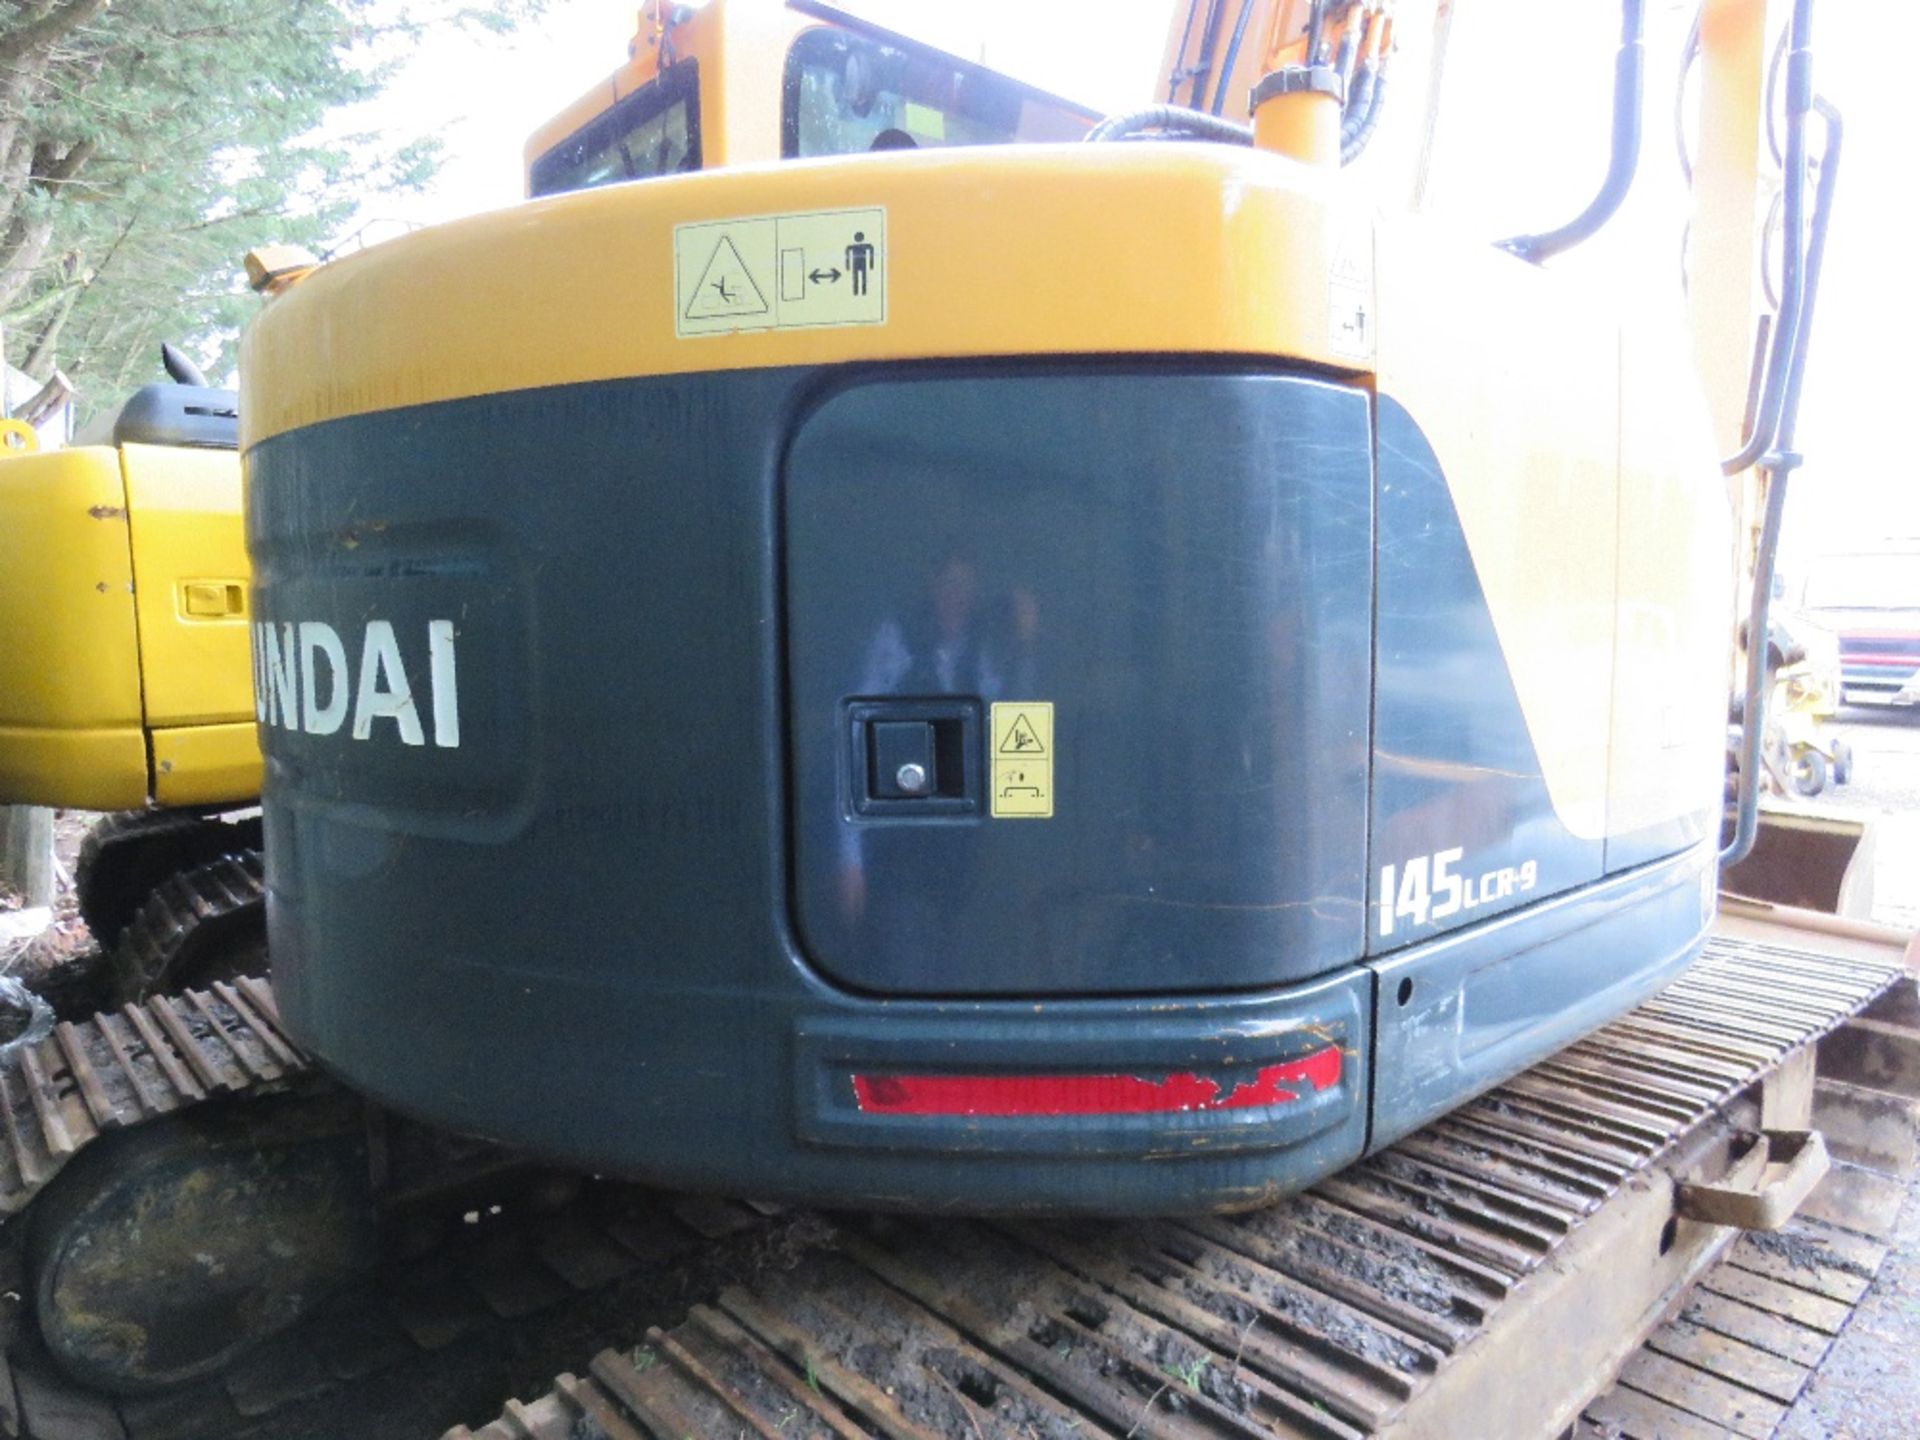 HYUNDAI 145 LCR-9 REDUCED TAIL SWING EXCAVATOR, YEAR 2012, 8688 REC HRS, 2NO BUCKETS, - Image 12 of 15